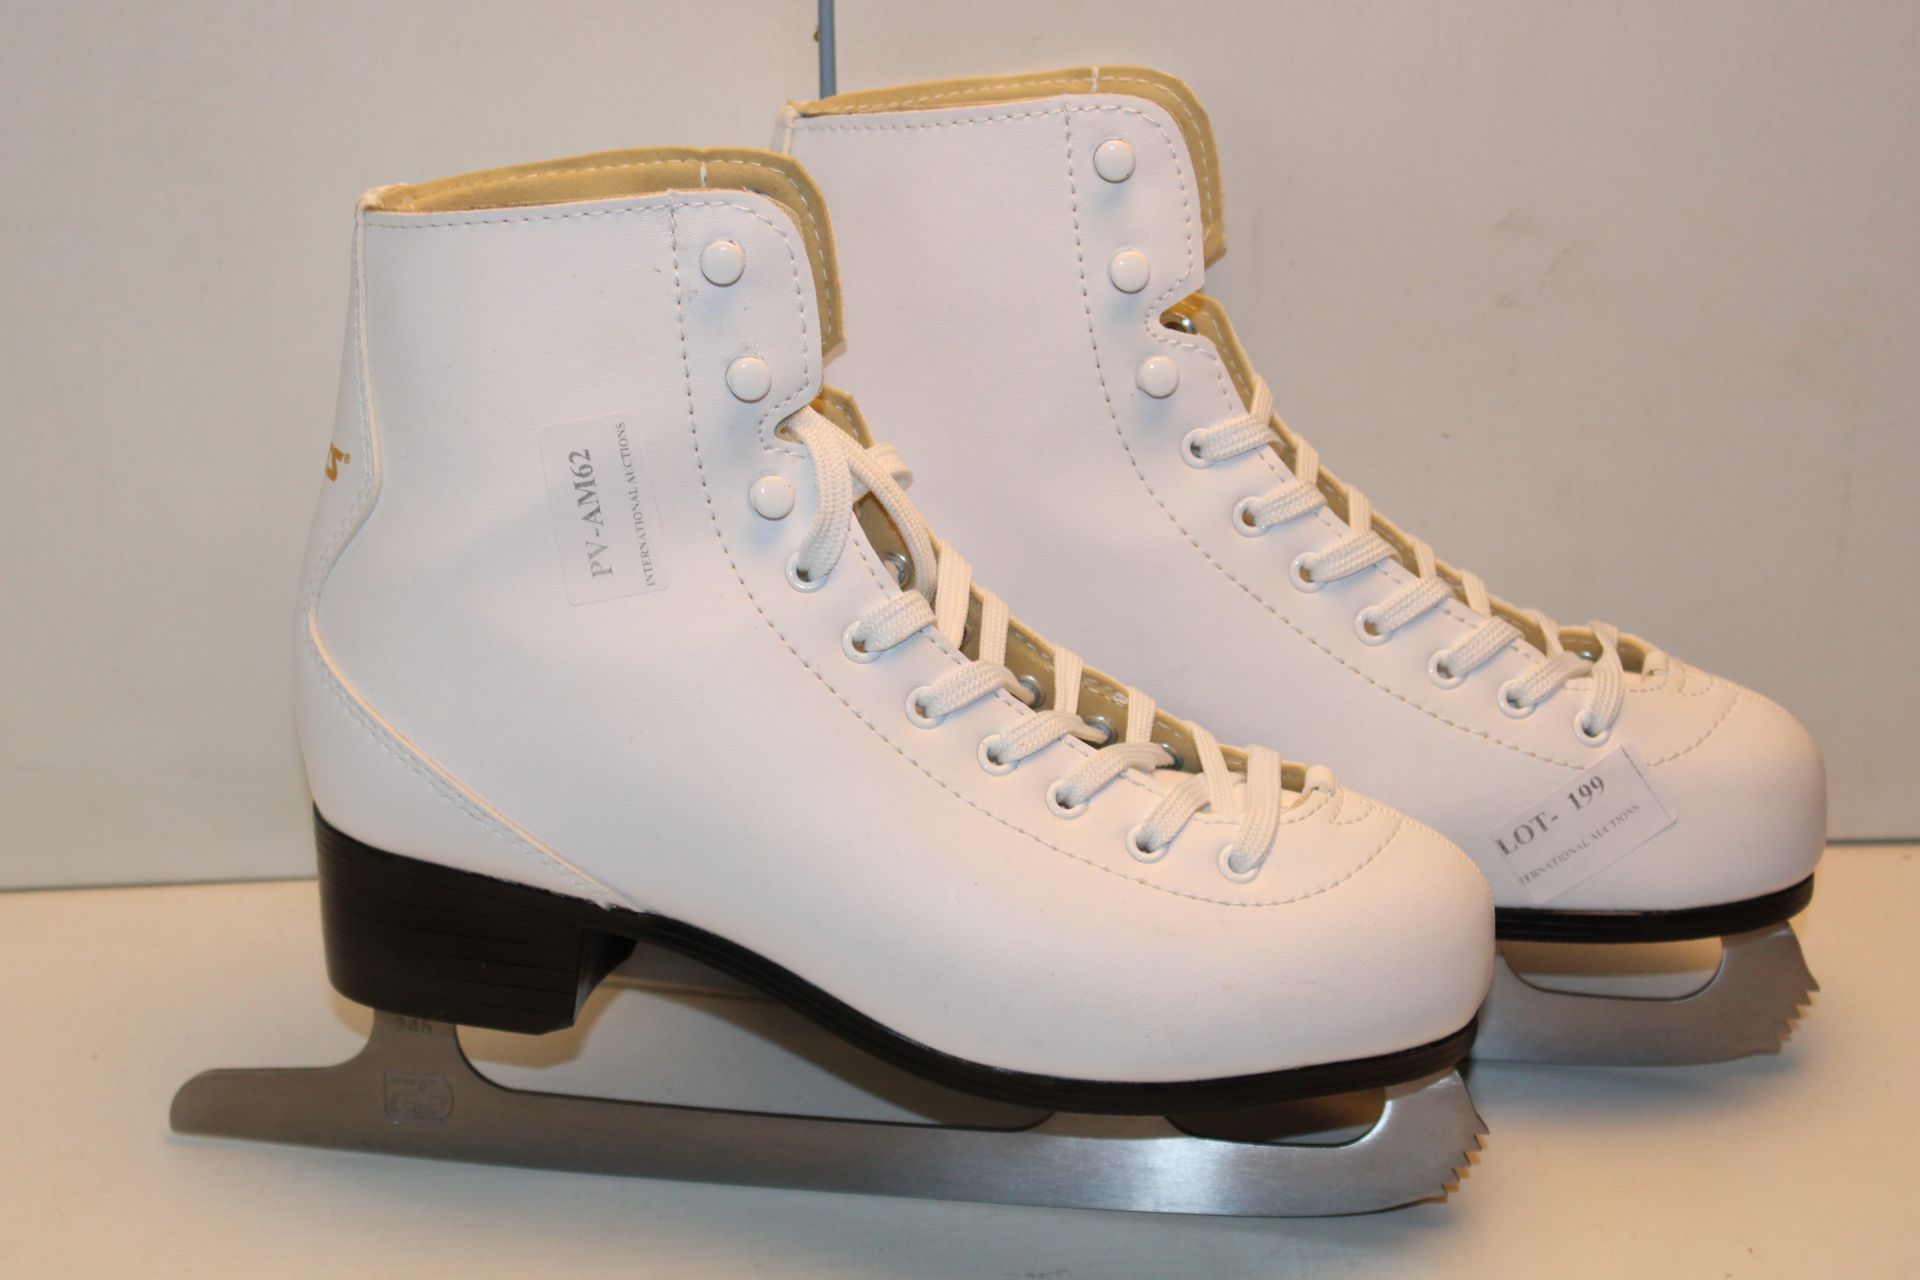 UNBOXED ICE SKATES Condition ReportAppraisal Available on Request- All Items are Unchecked/